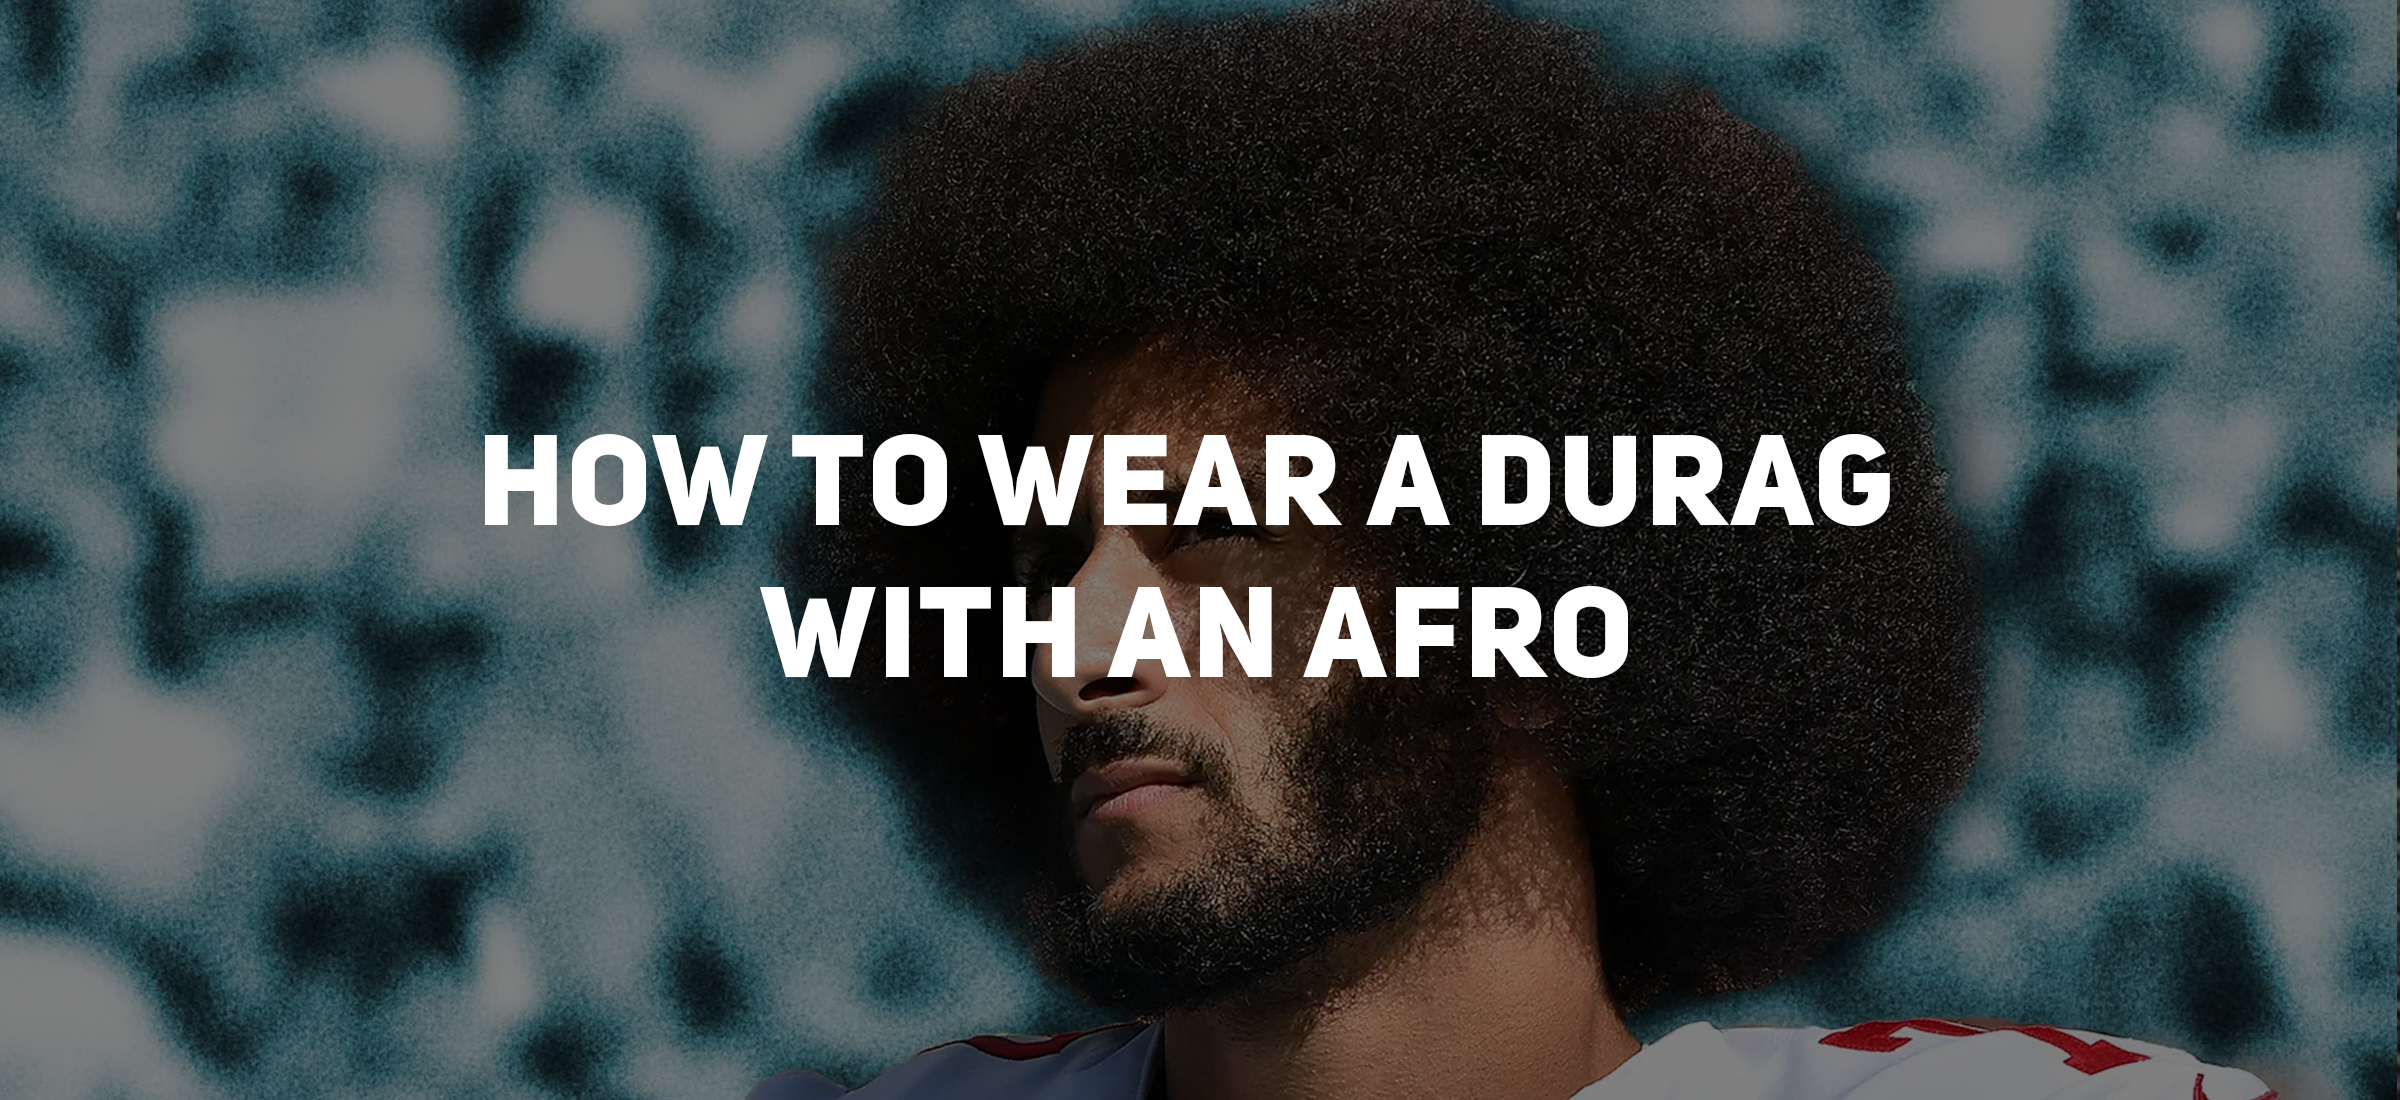 How to Wear a Durag with an Afro: Tips and Tricks